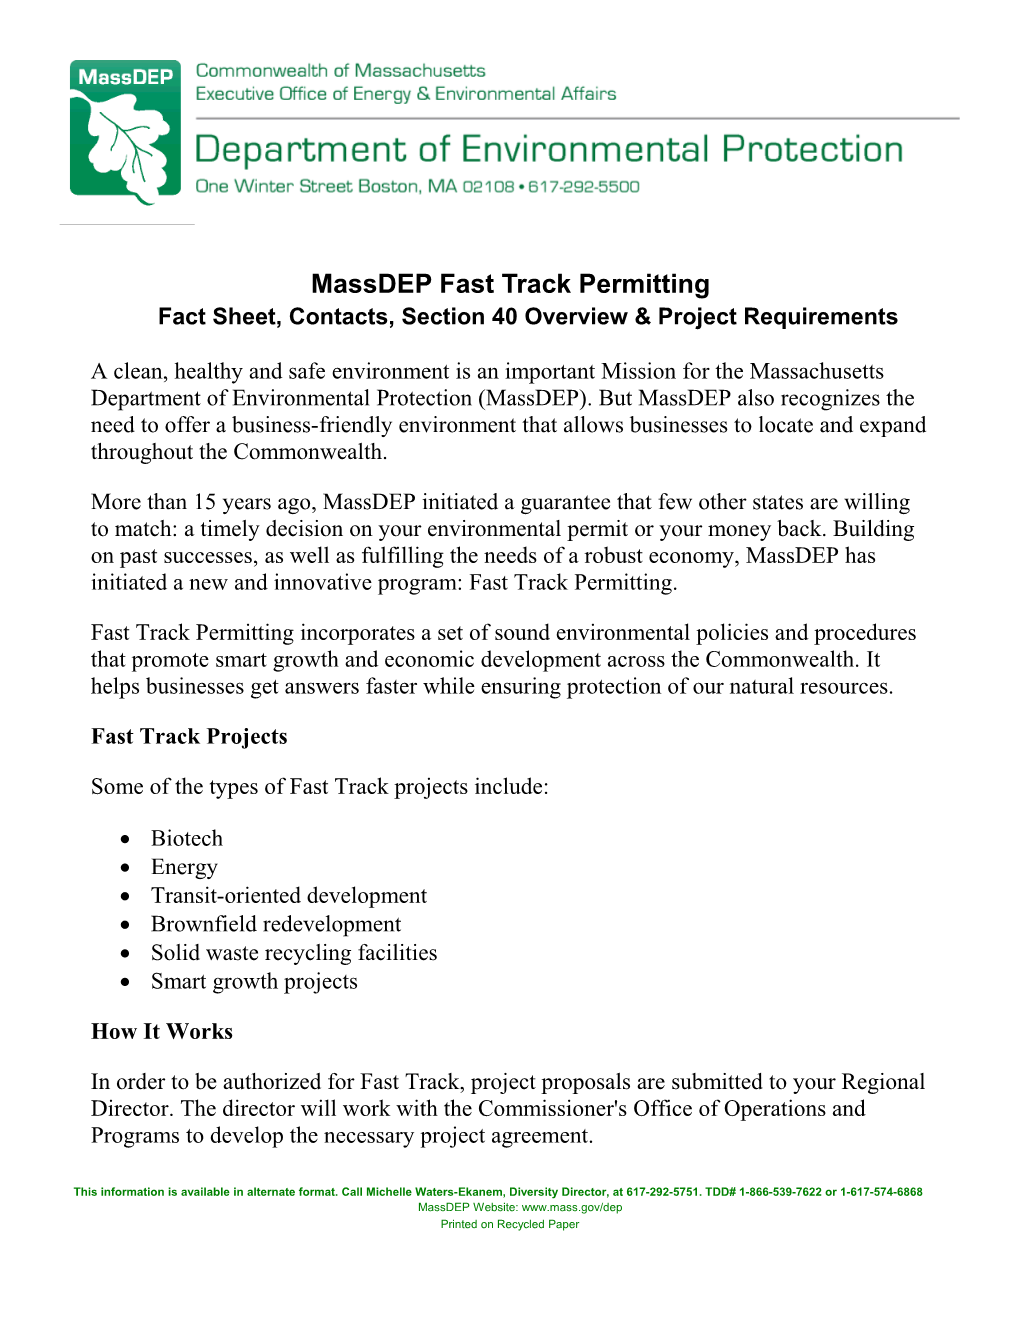 Massdep Fast Track Permittingfact Sheet, Contacts, Section 40 Overview & Project Requirements